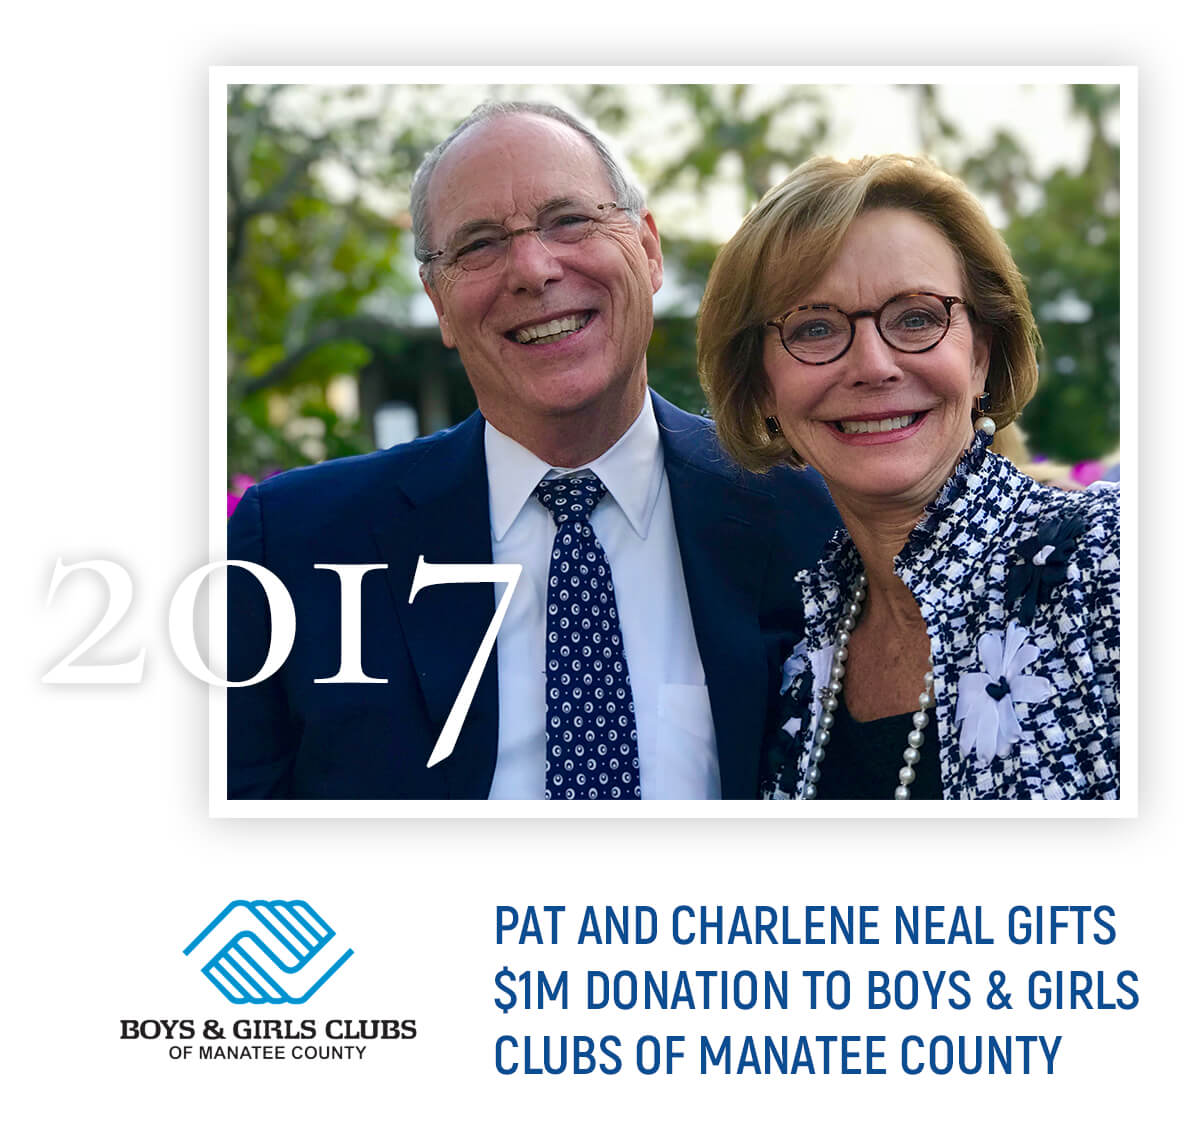 Pat and Charlene Neal gifts $1M donation